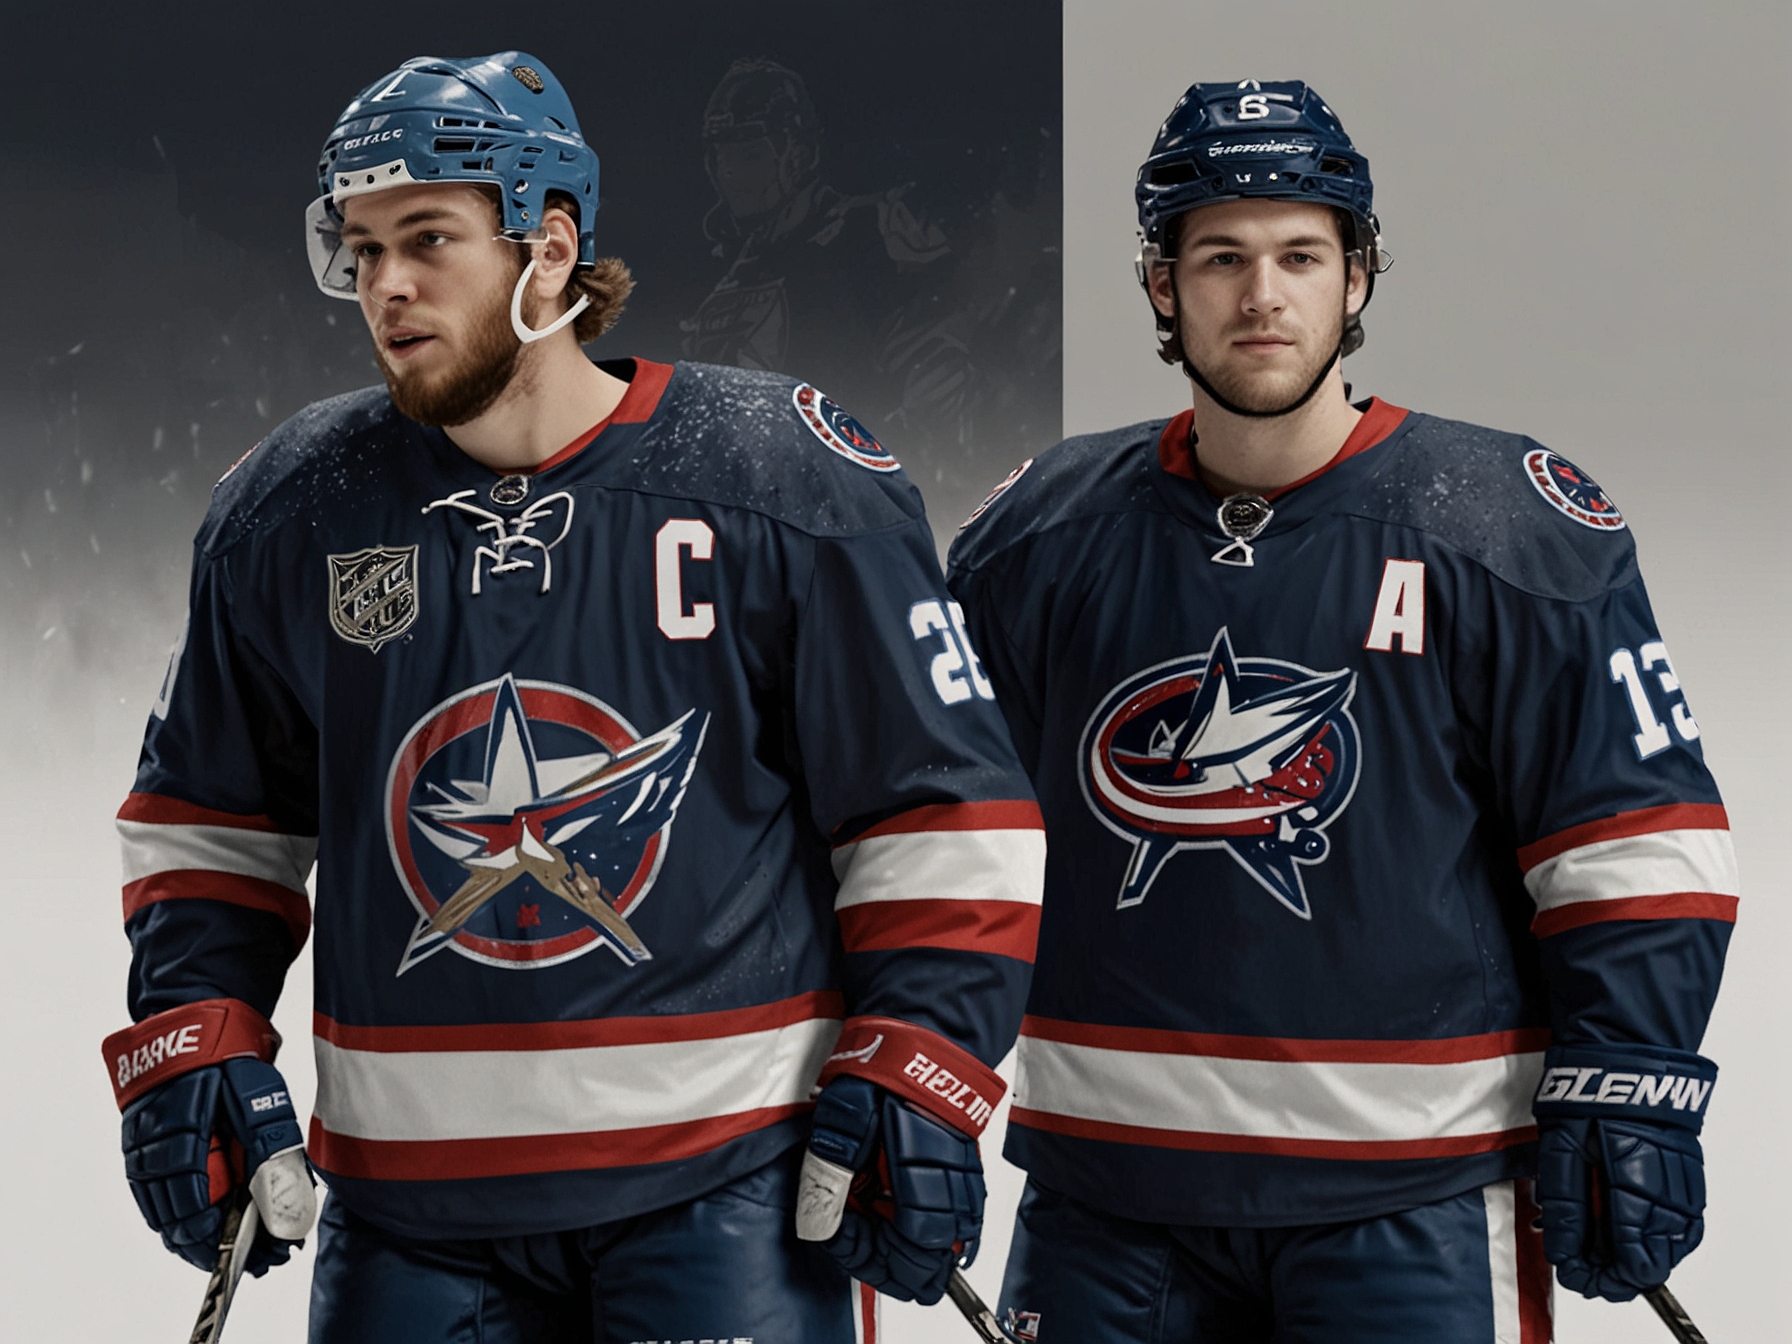 A graphic showing the top prospects of the 2023 NHL draft, including Marco Rossi, Jamie Drysdale, and Cole Perfetti, highlighting the strategic options available for the Blue Jackets at the No. 4 spot.